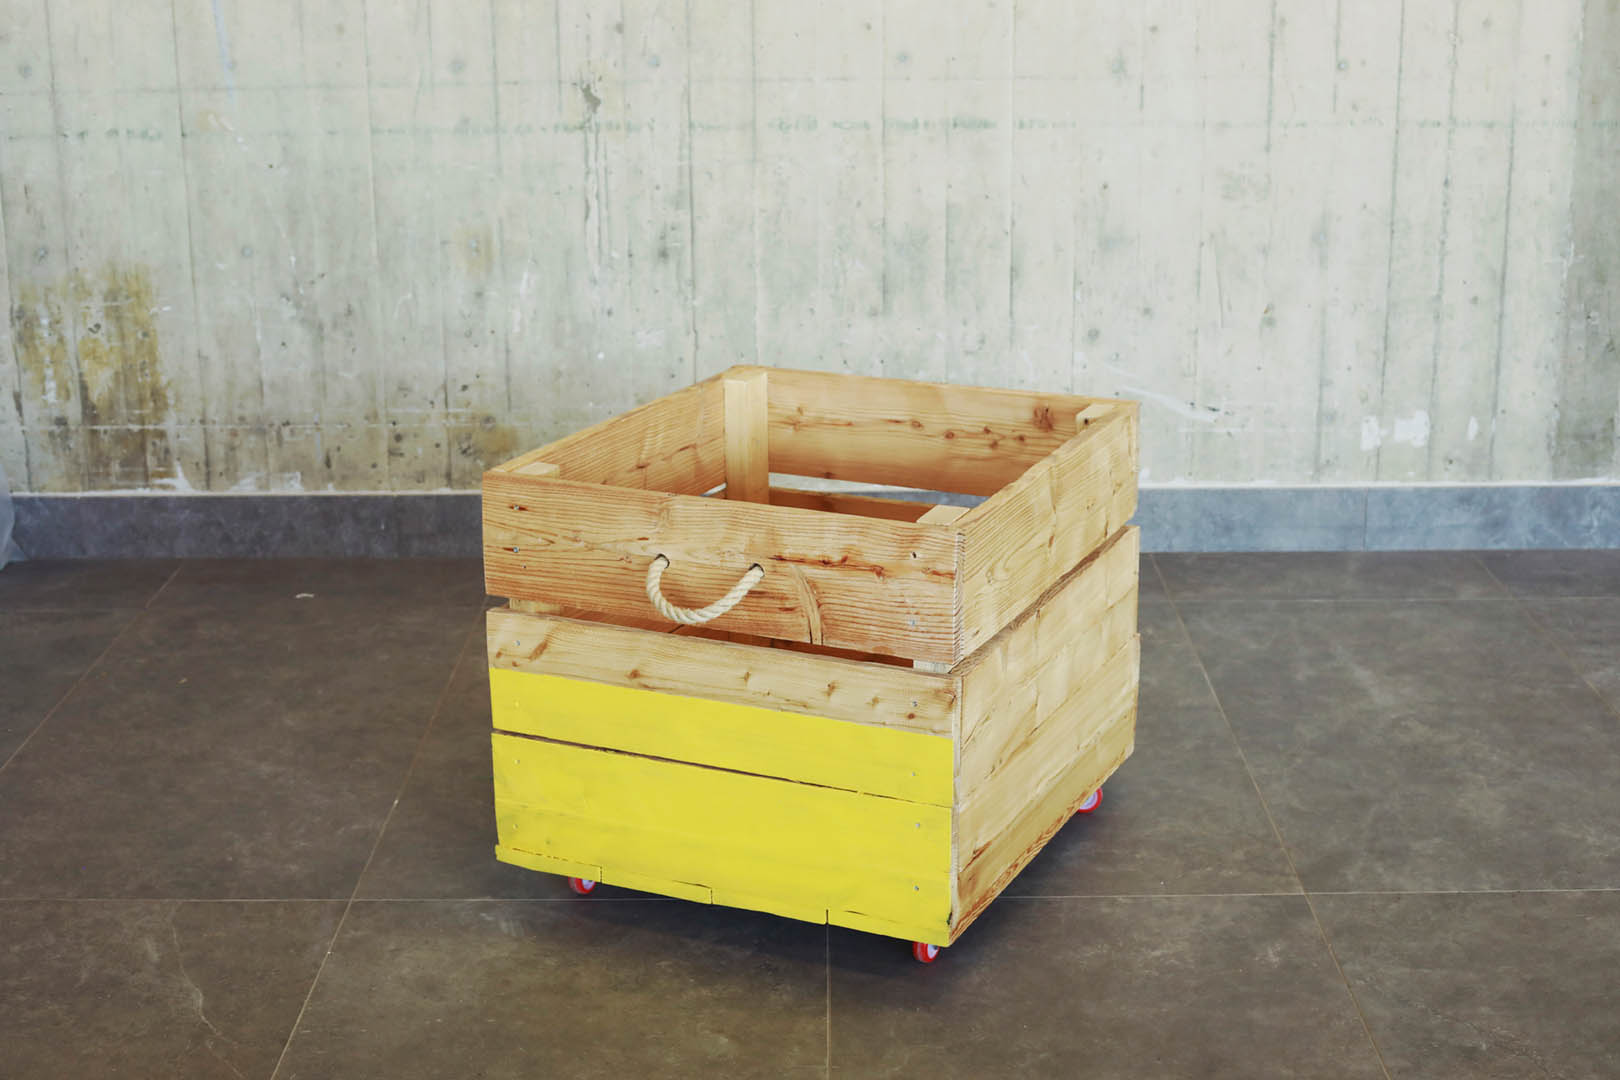 Scatola con ruote. Wooden box with weels. Photography: Lourdes Cabrera